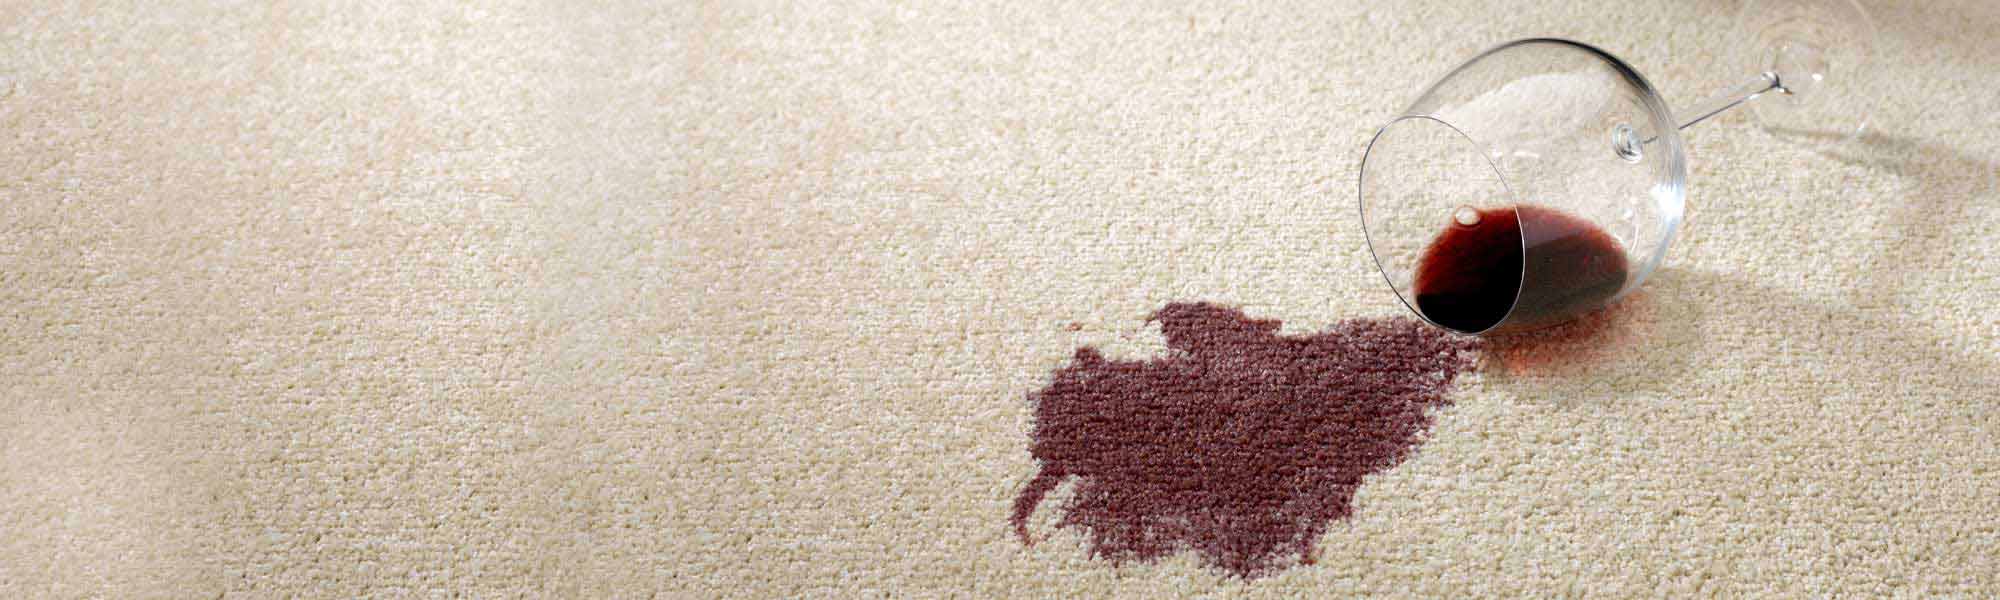 Professional Stain Removal Service by Chem-Dry in Chapel Hill & Durham